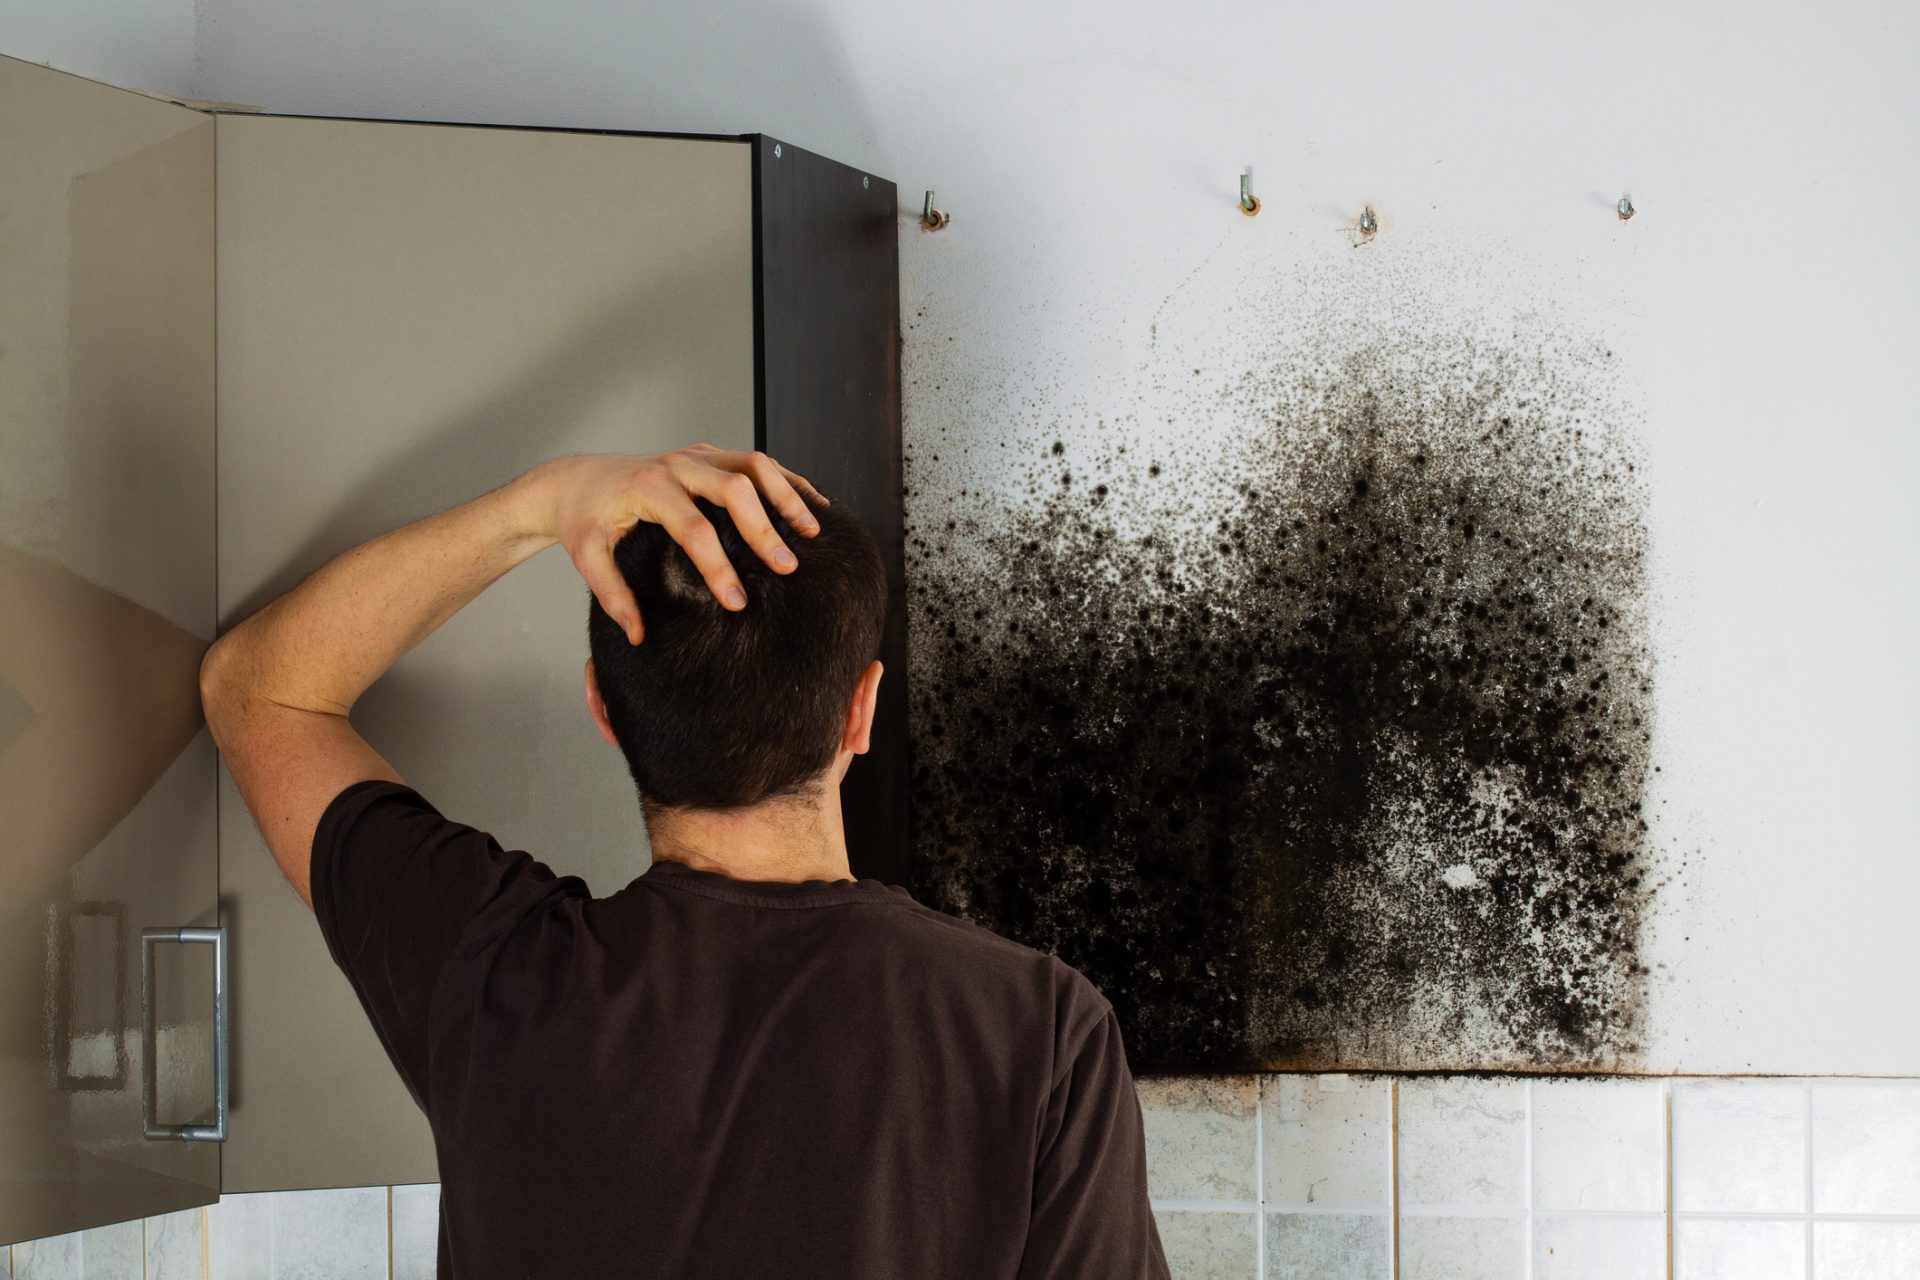 Chronic inflammatory response (cirs) is caused from exposure to mold in water damaged buildings